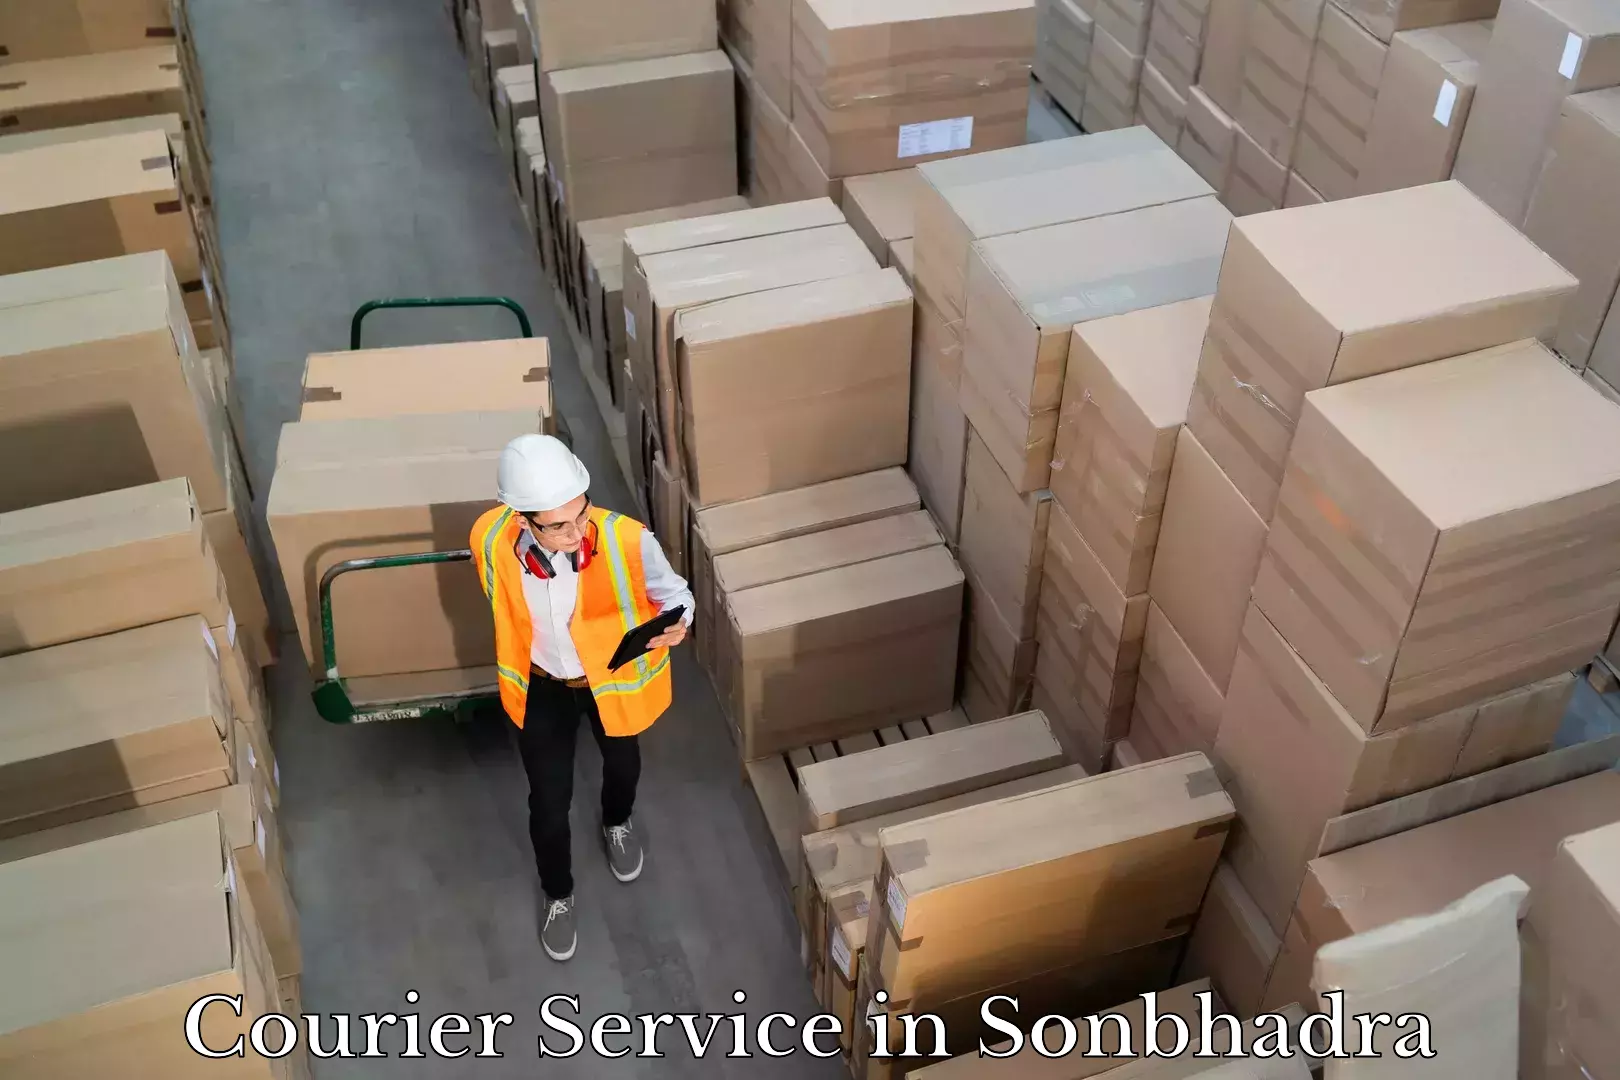 Fastest parcel delivery in Sonbhadra